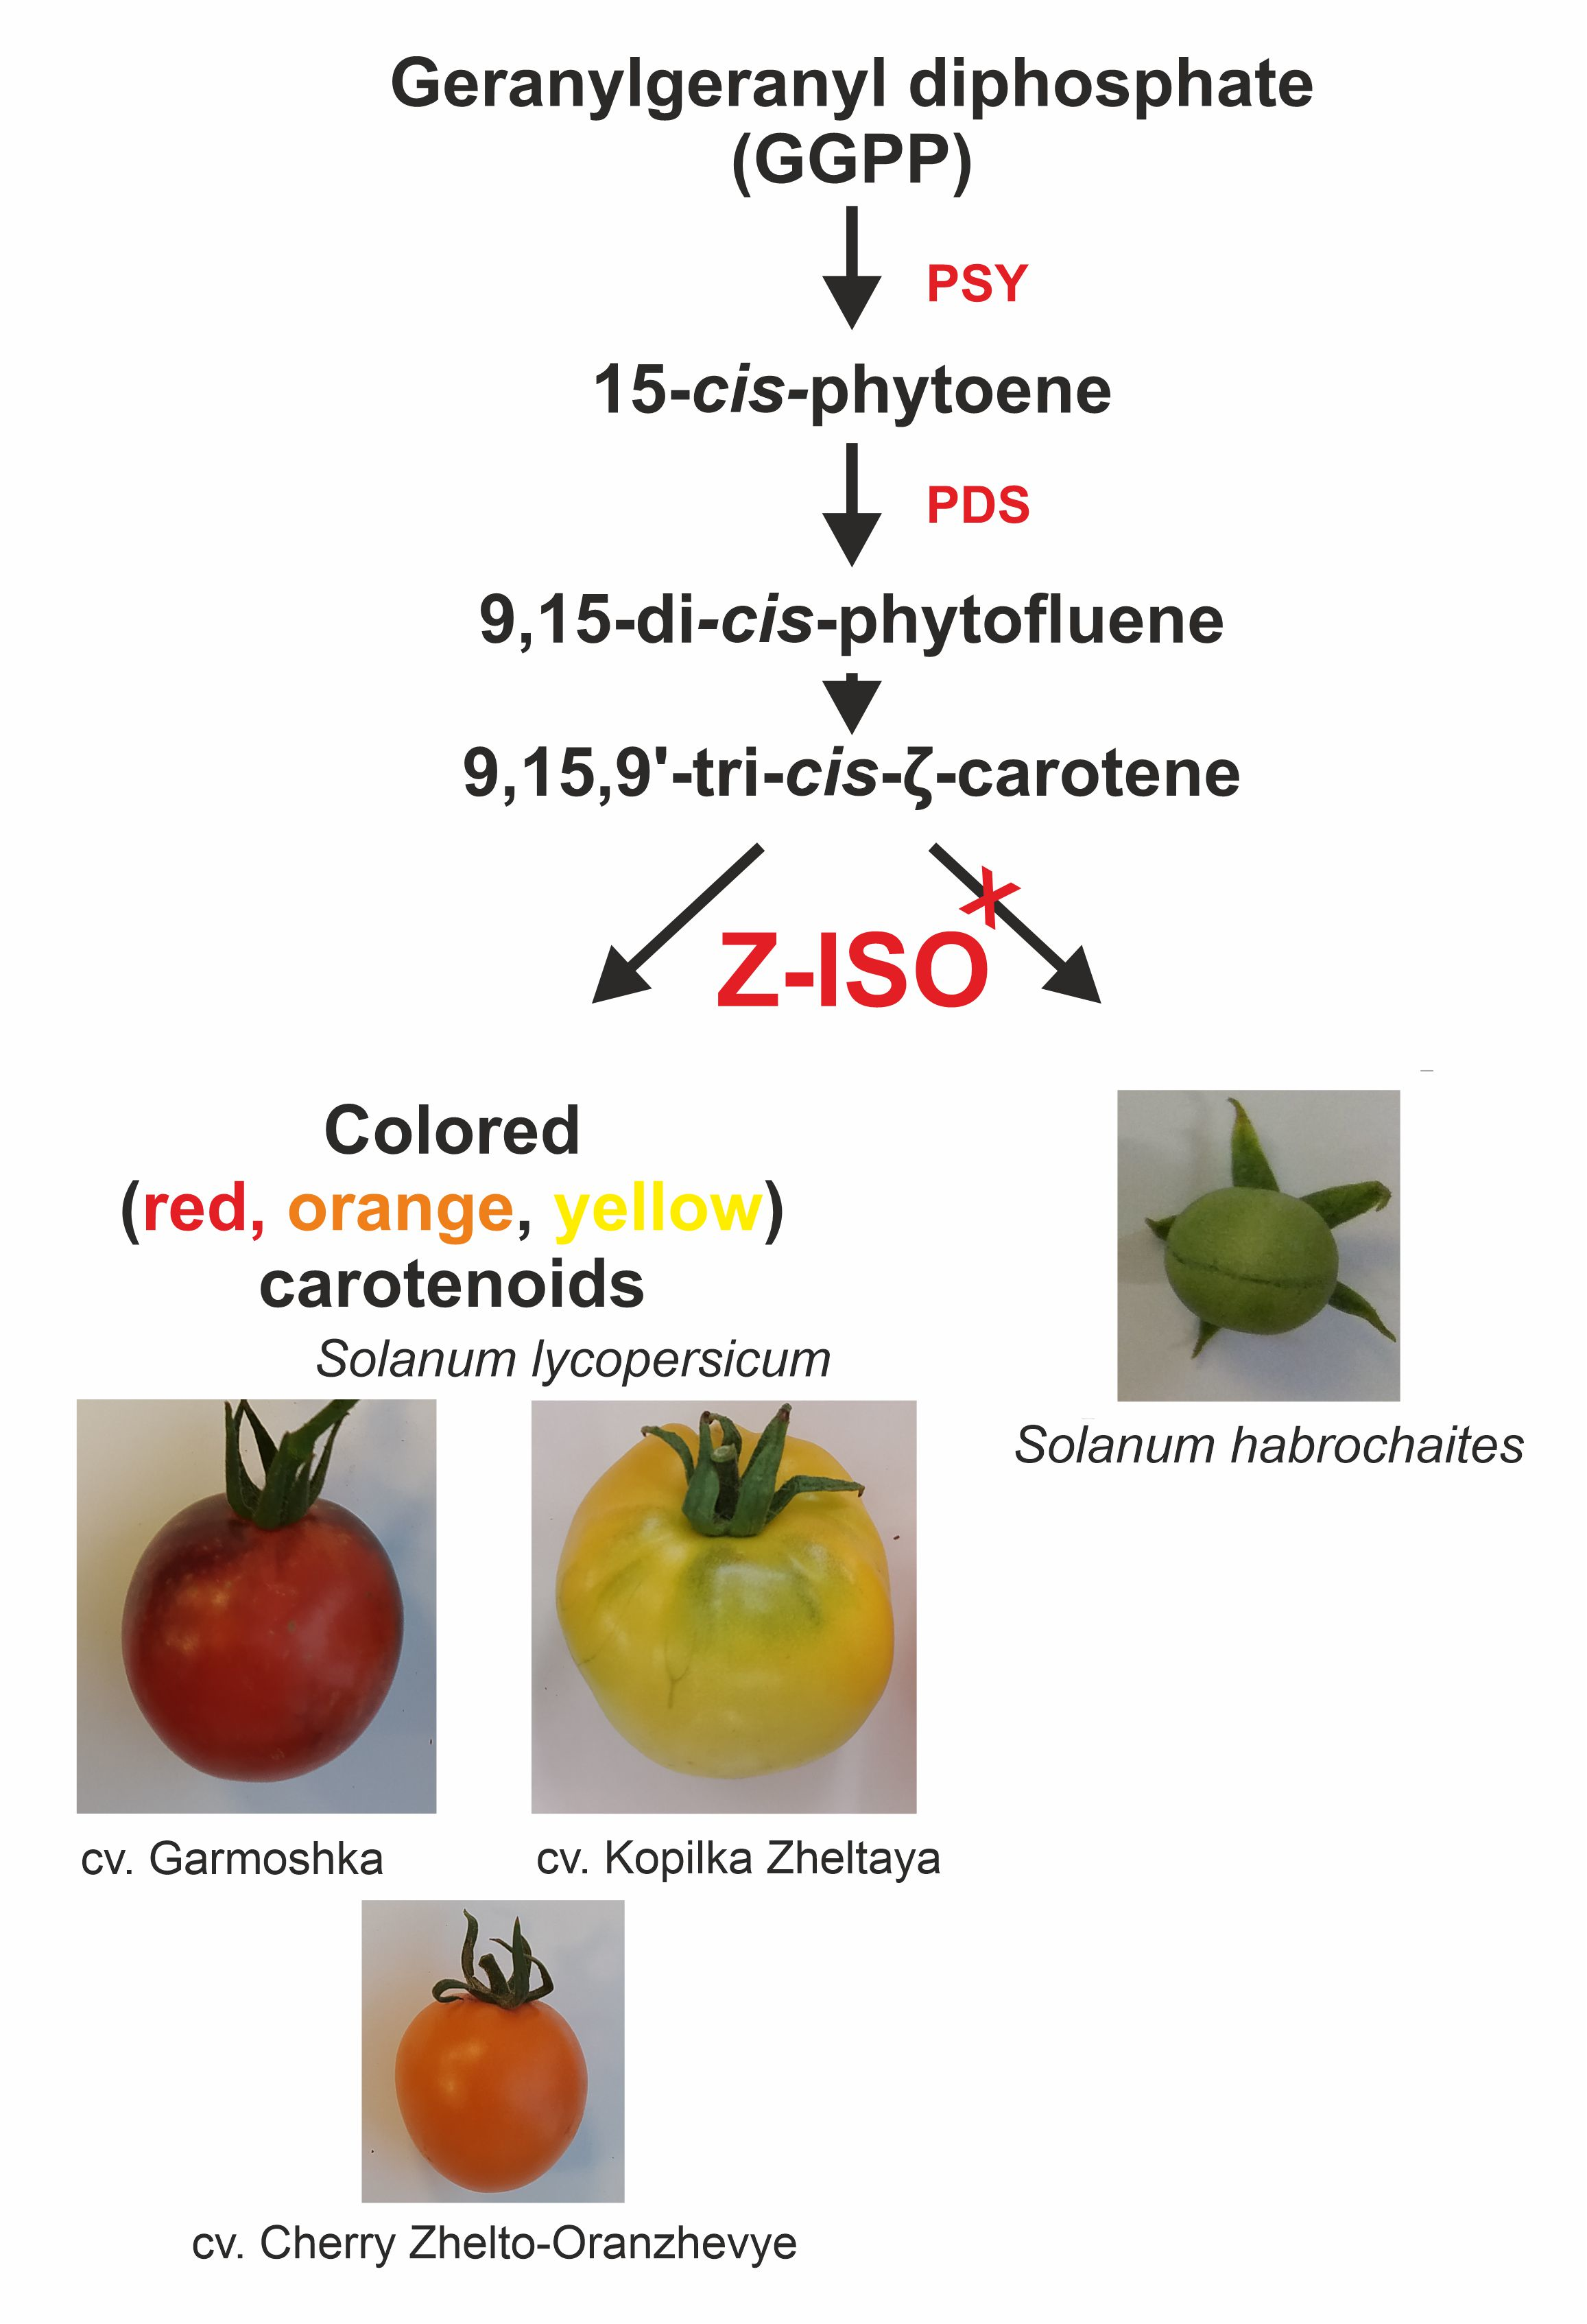 Plants | Free Full-Text | of 15-cis-&zeta;-Carotene Isomerase in Cultivated and Wild Tomato Species Differing in Ripe Fruit Pigmentation